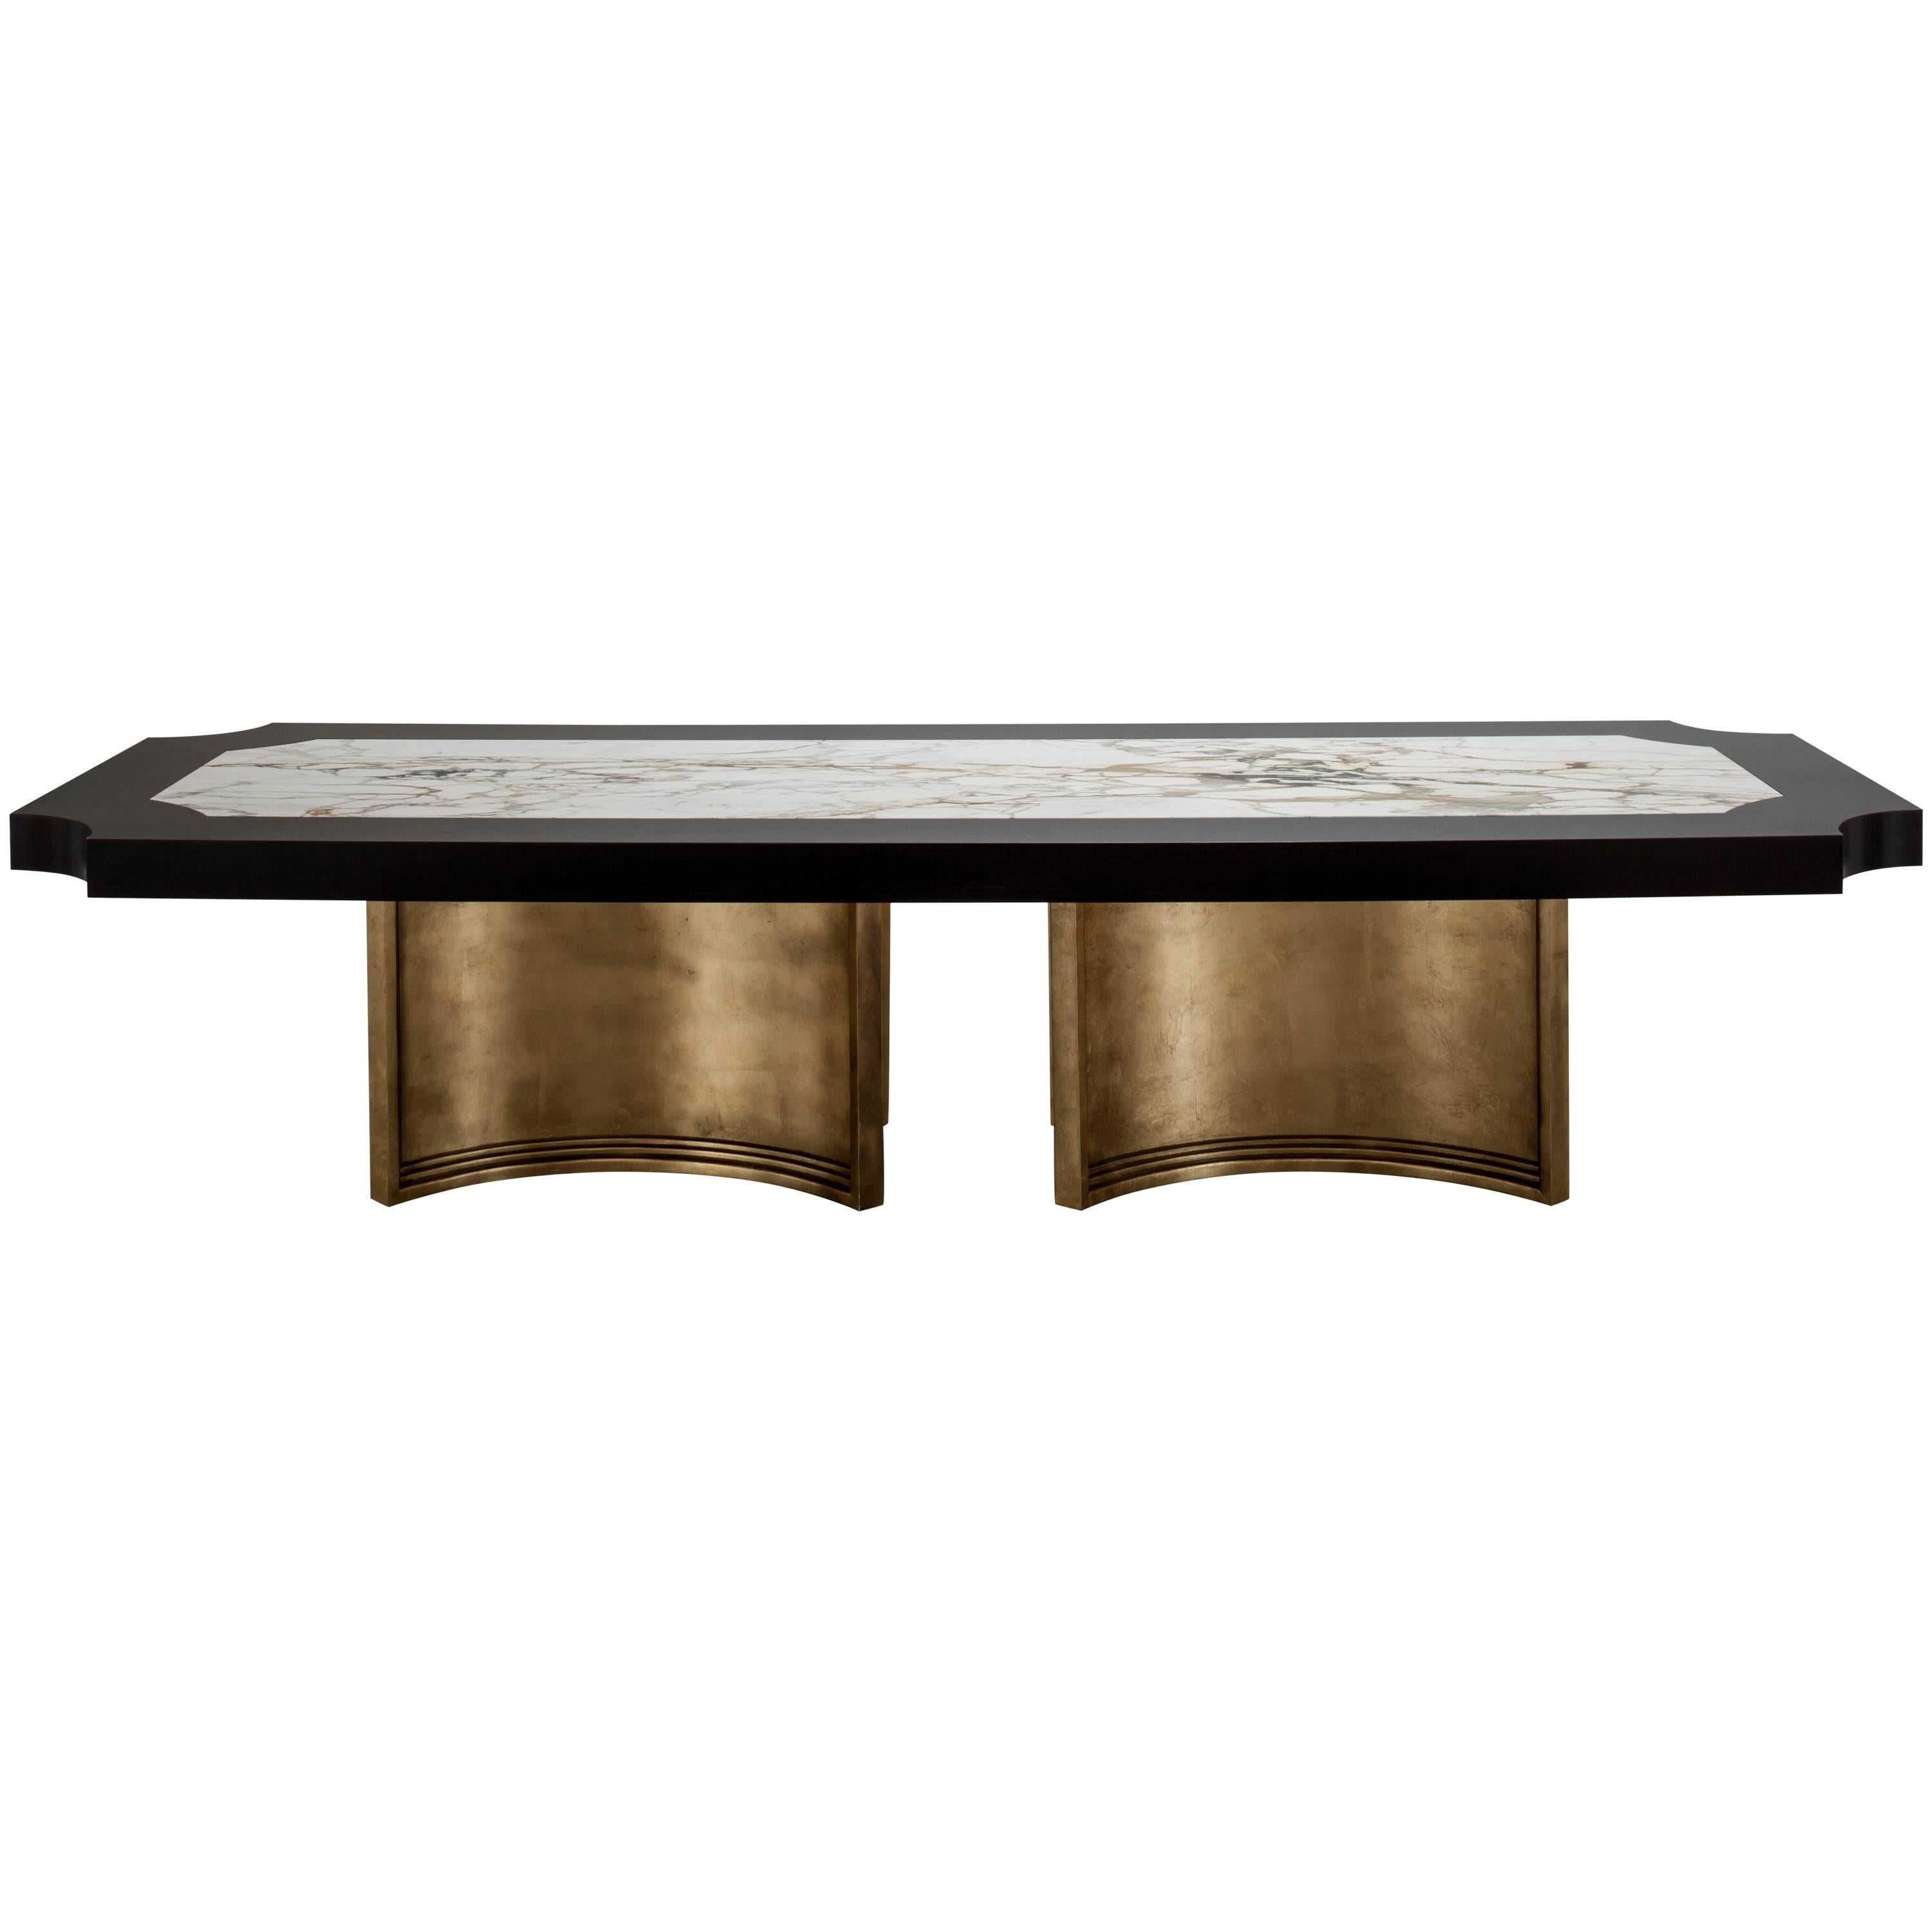 BRUSSELS DINING TABLE - Ebony Oak, Carrara Marble and Gold Leafed Modern Table For Sale